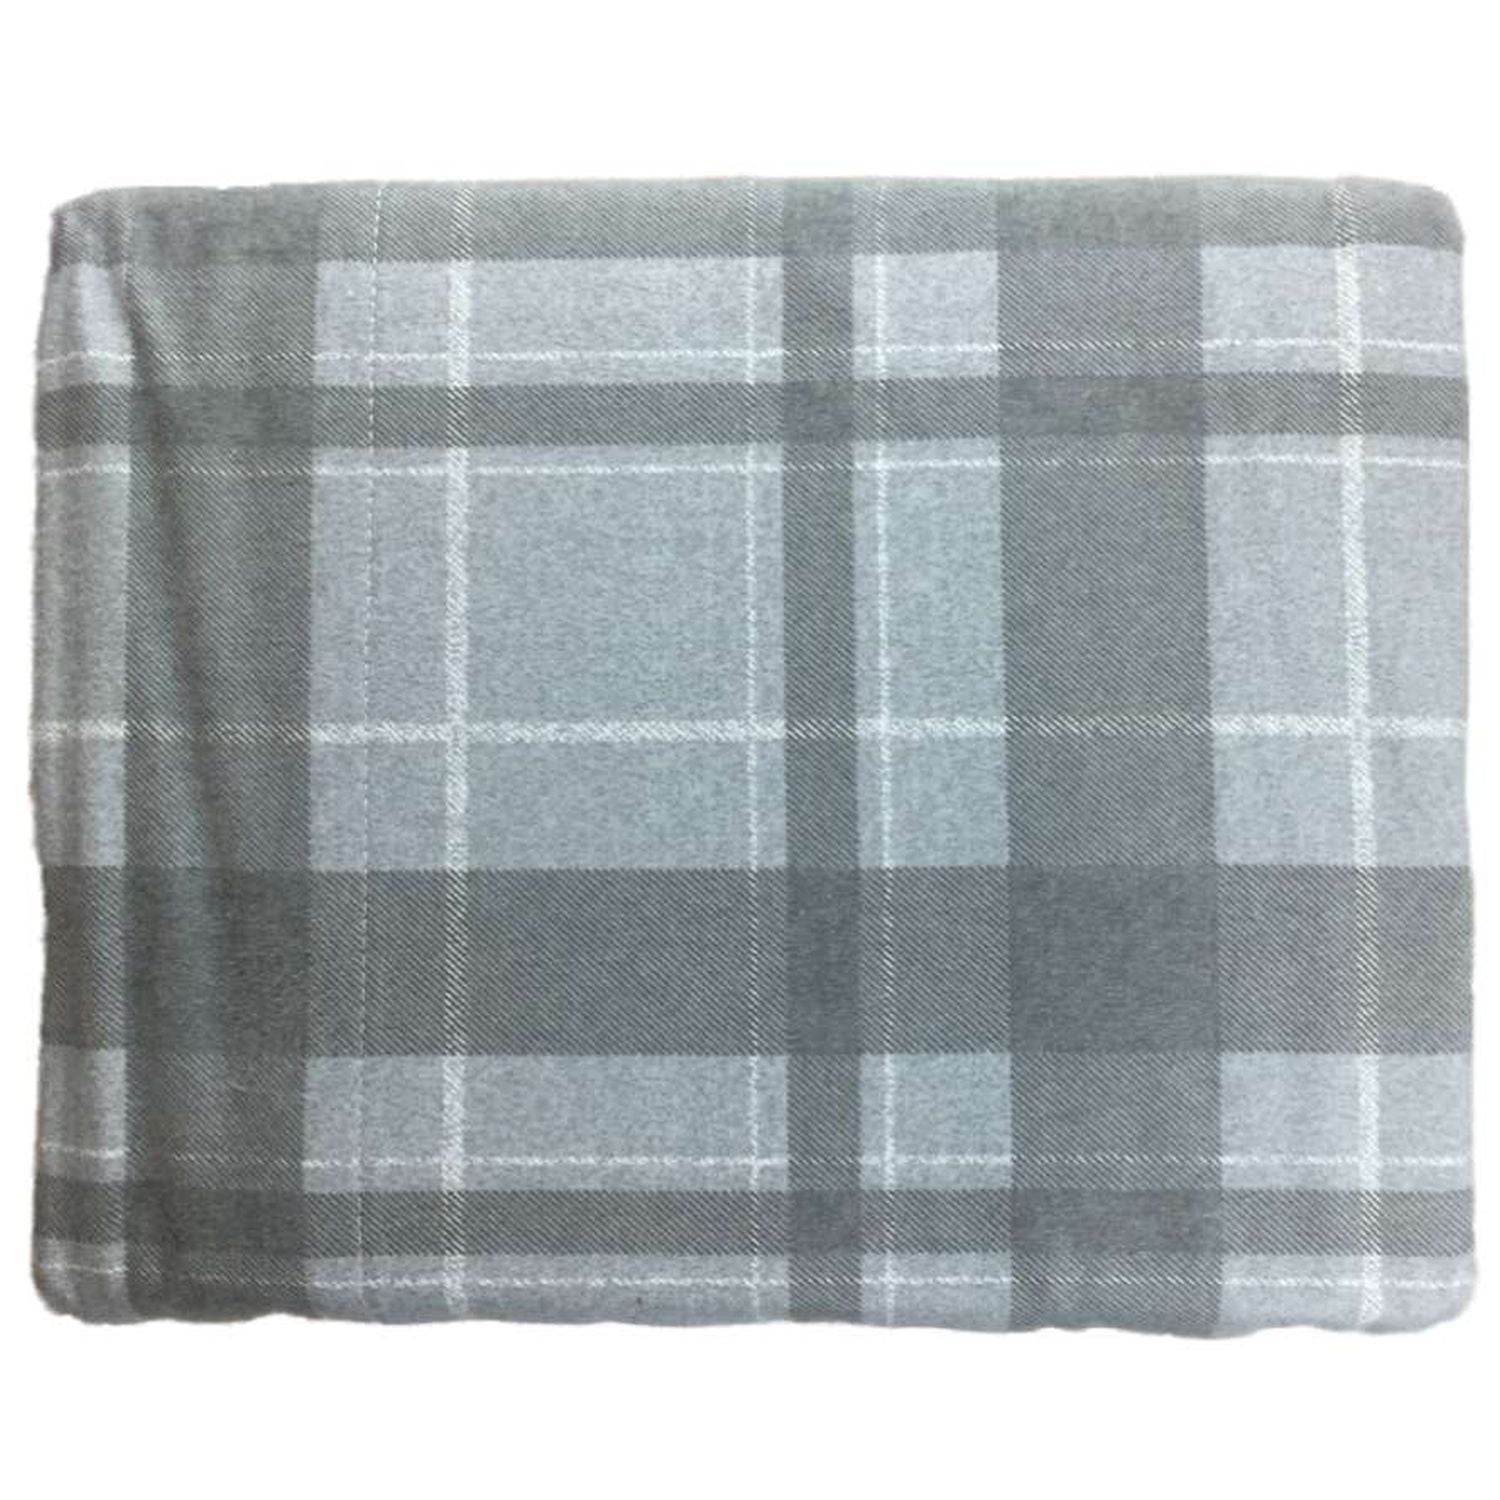 Cuddle Duds Flannel Sheet Set Gray Plaid Queen Bed Sheets Bedding ...